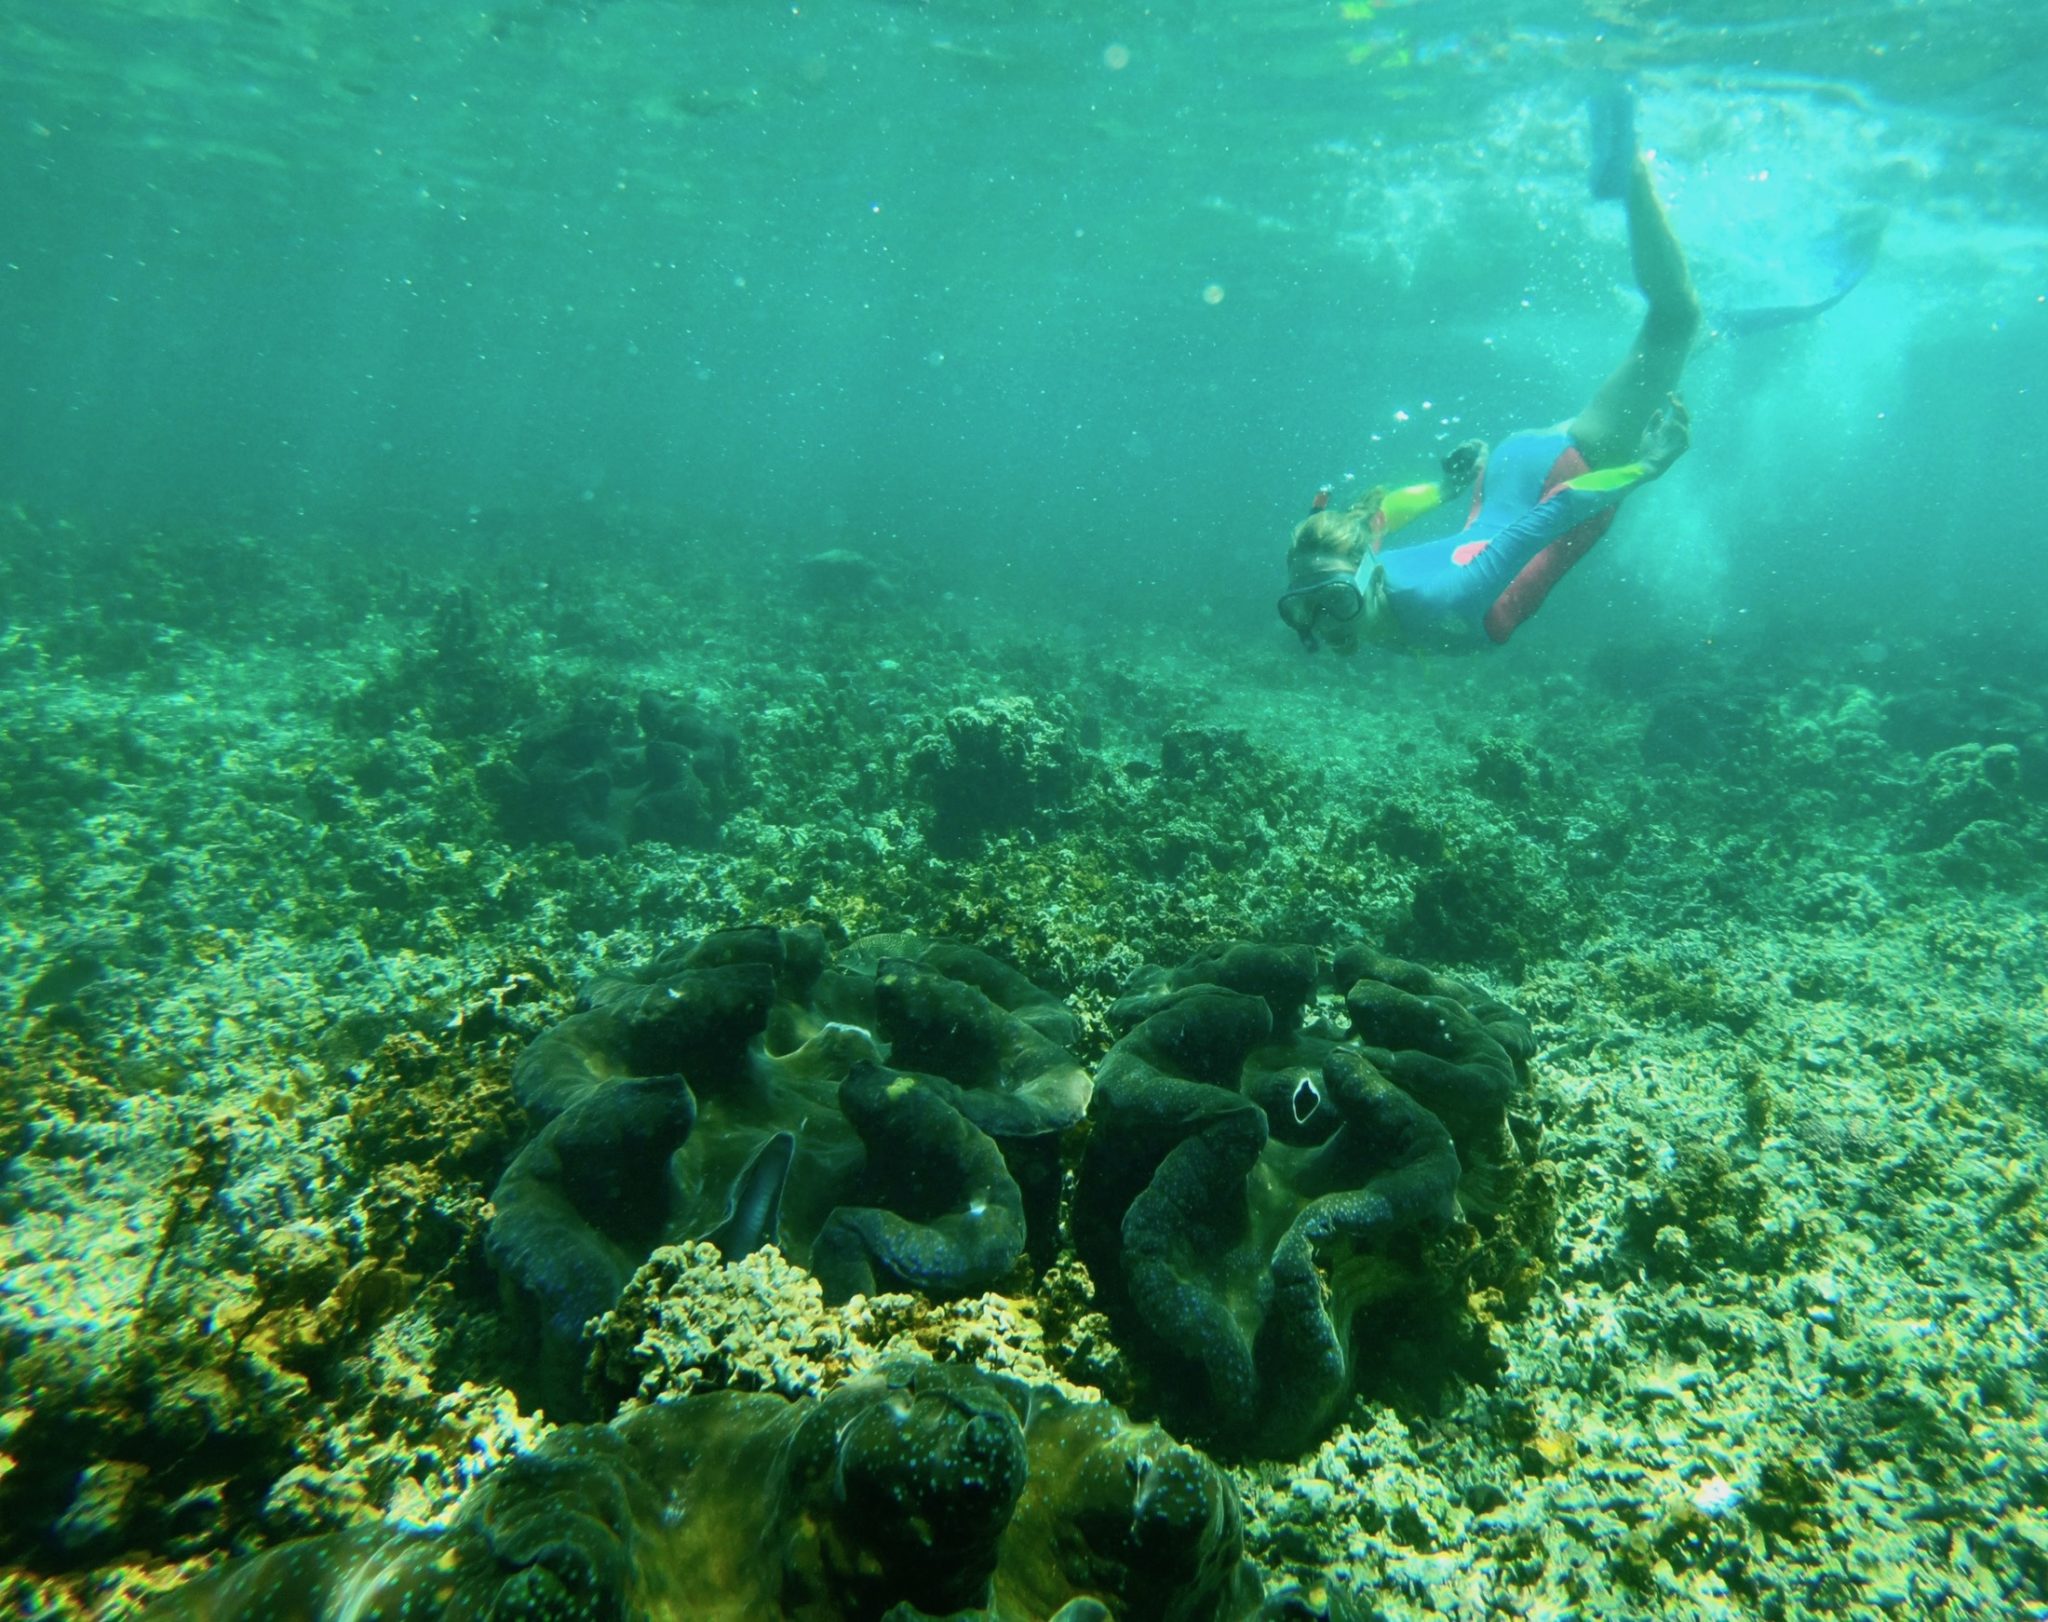 Hayley snorkelling in Samoa with a rashsuit